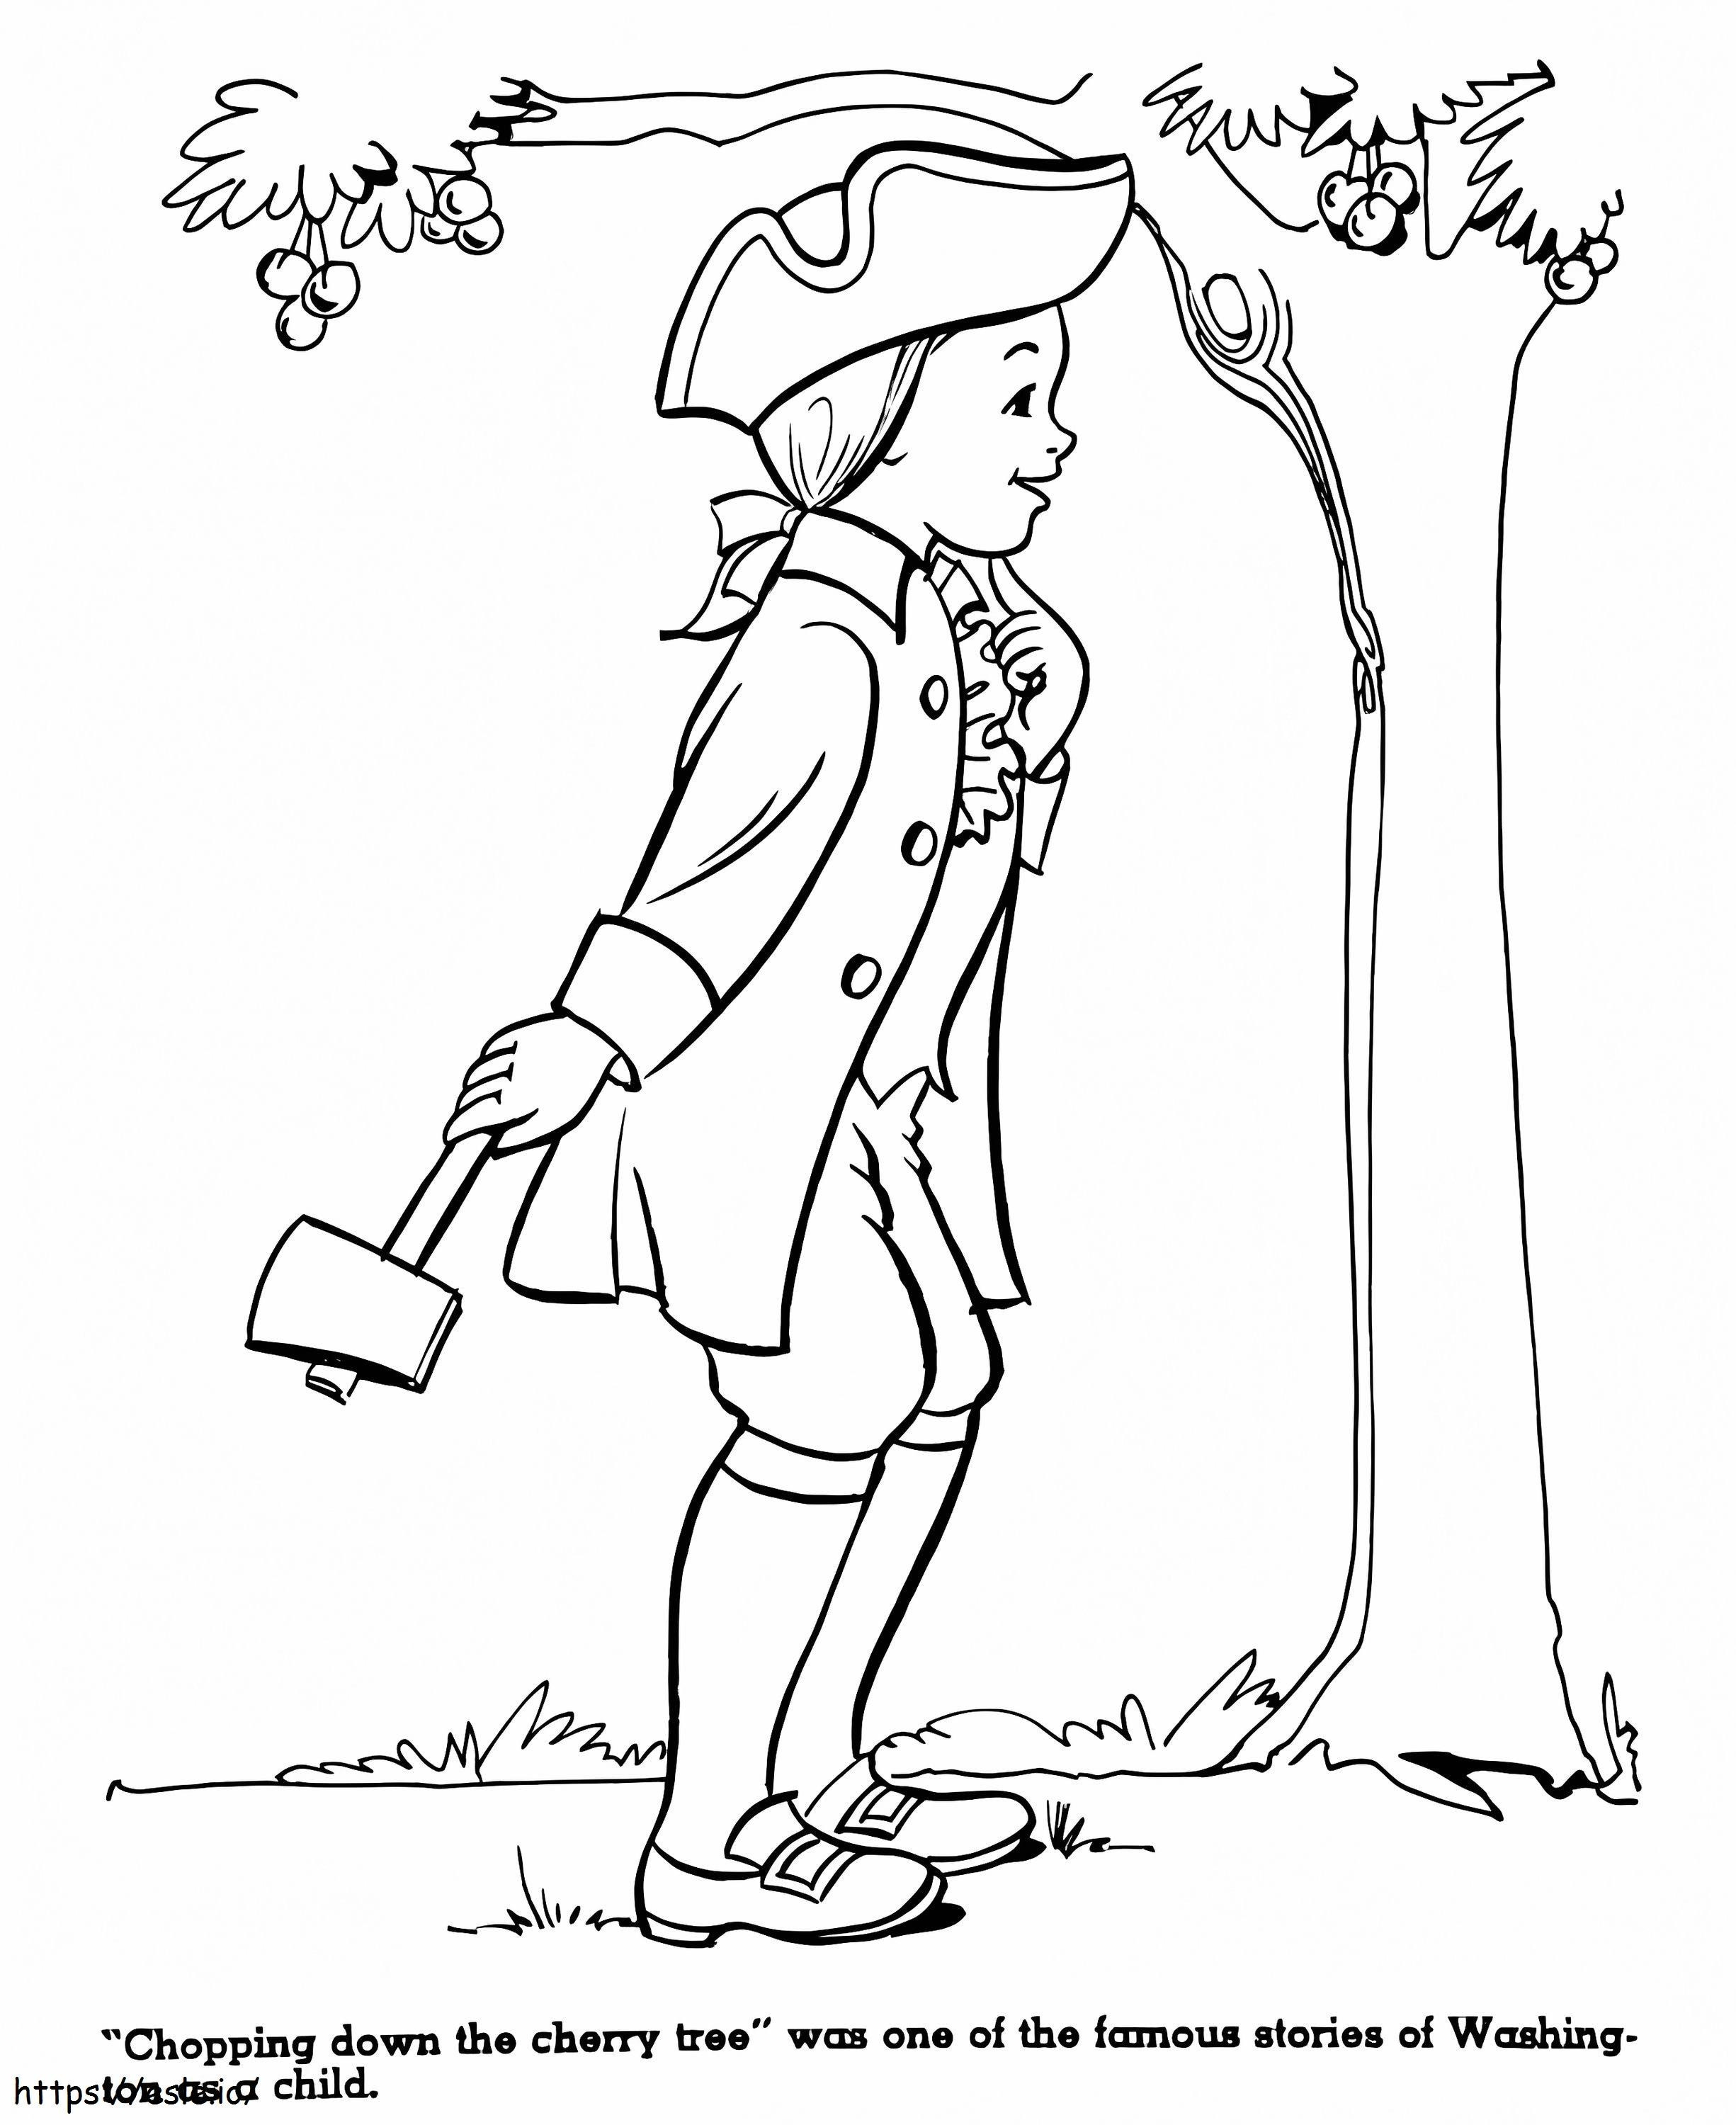 Young George Washington coloring page